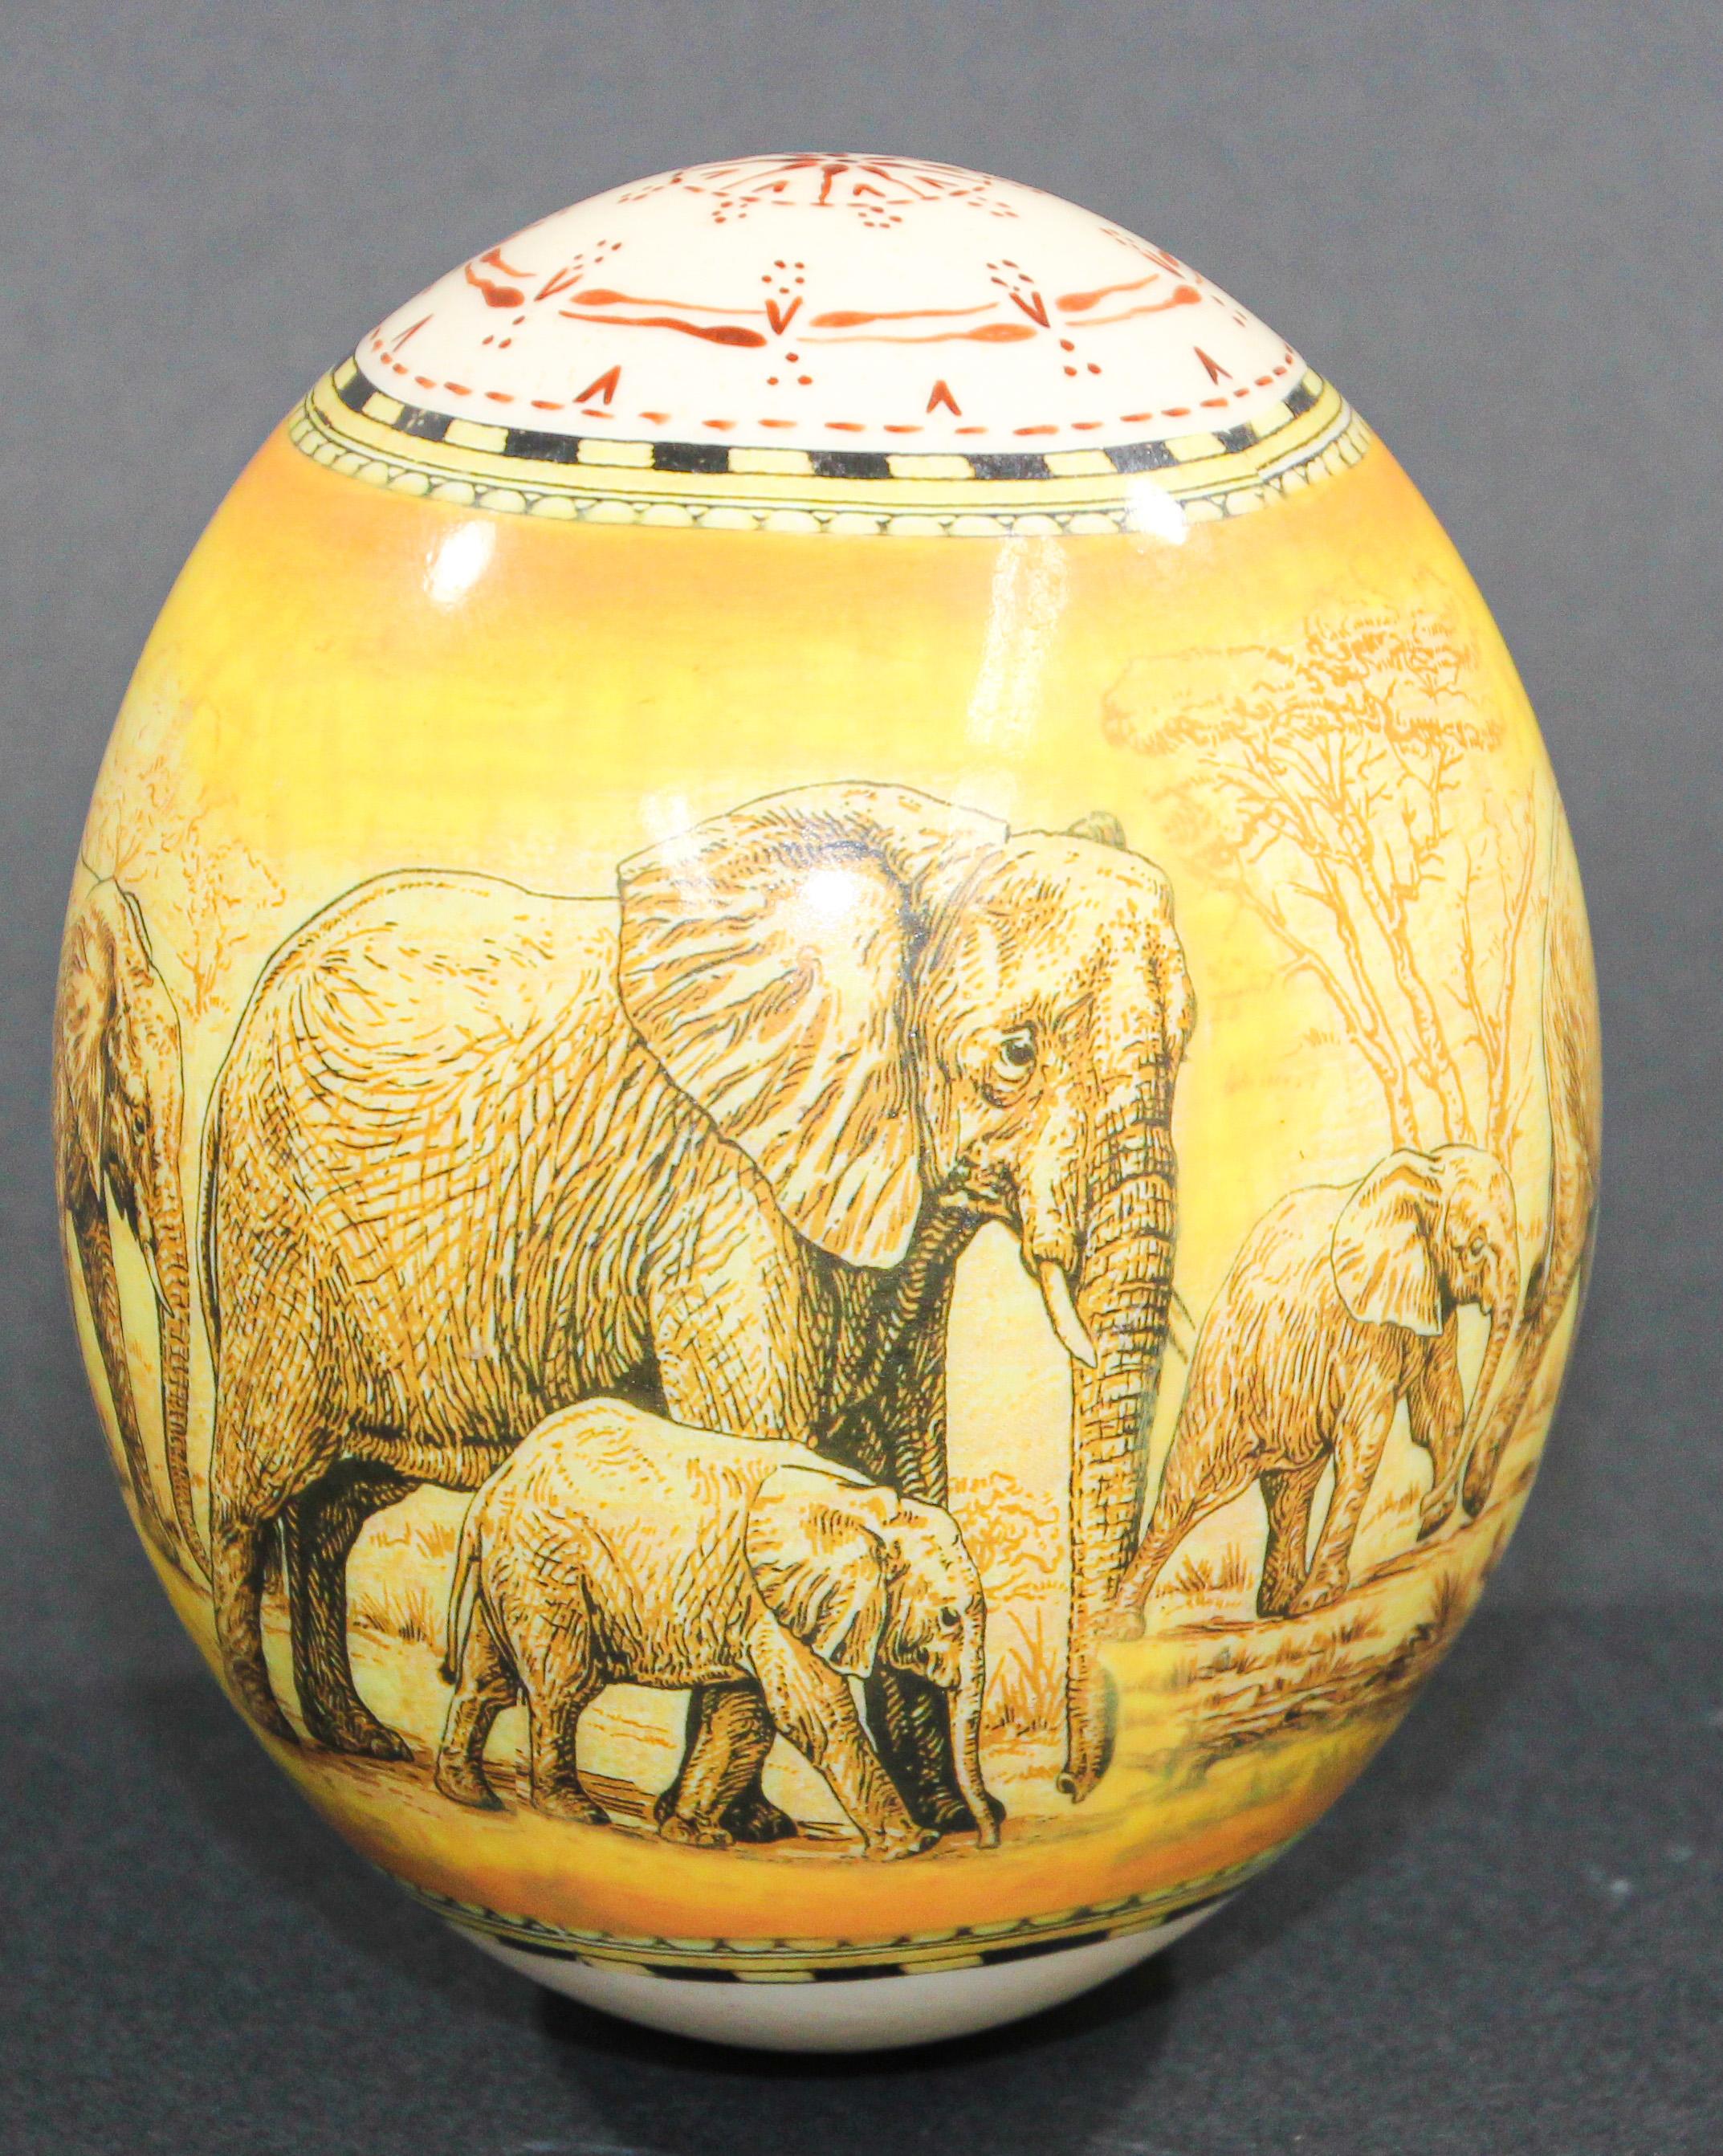 Collectible Ostrich Egg Shell Handpainted with Elephants Scene 1